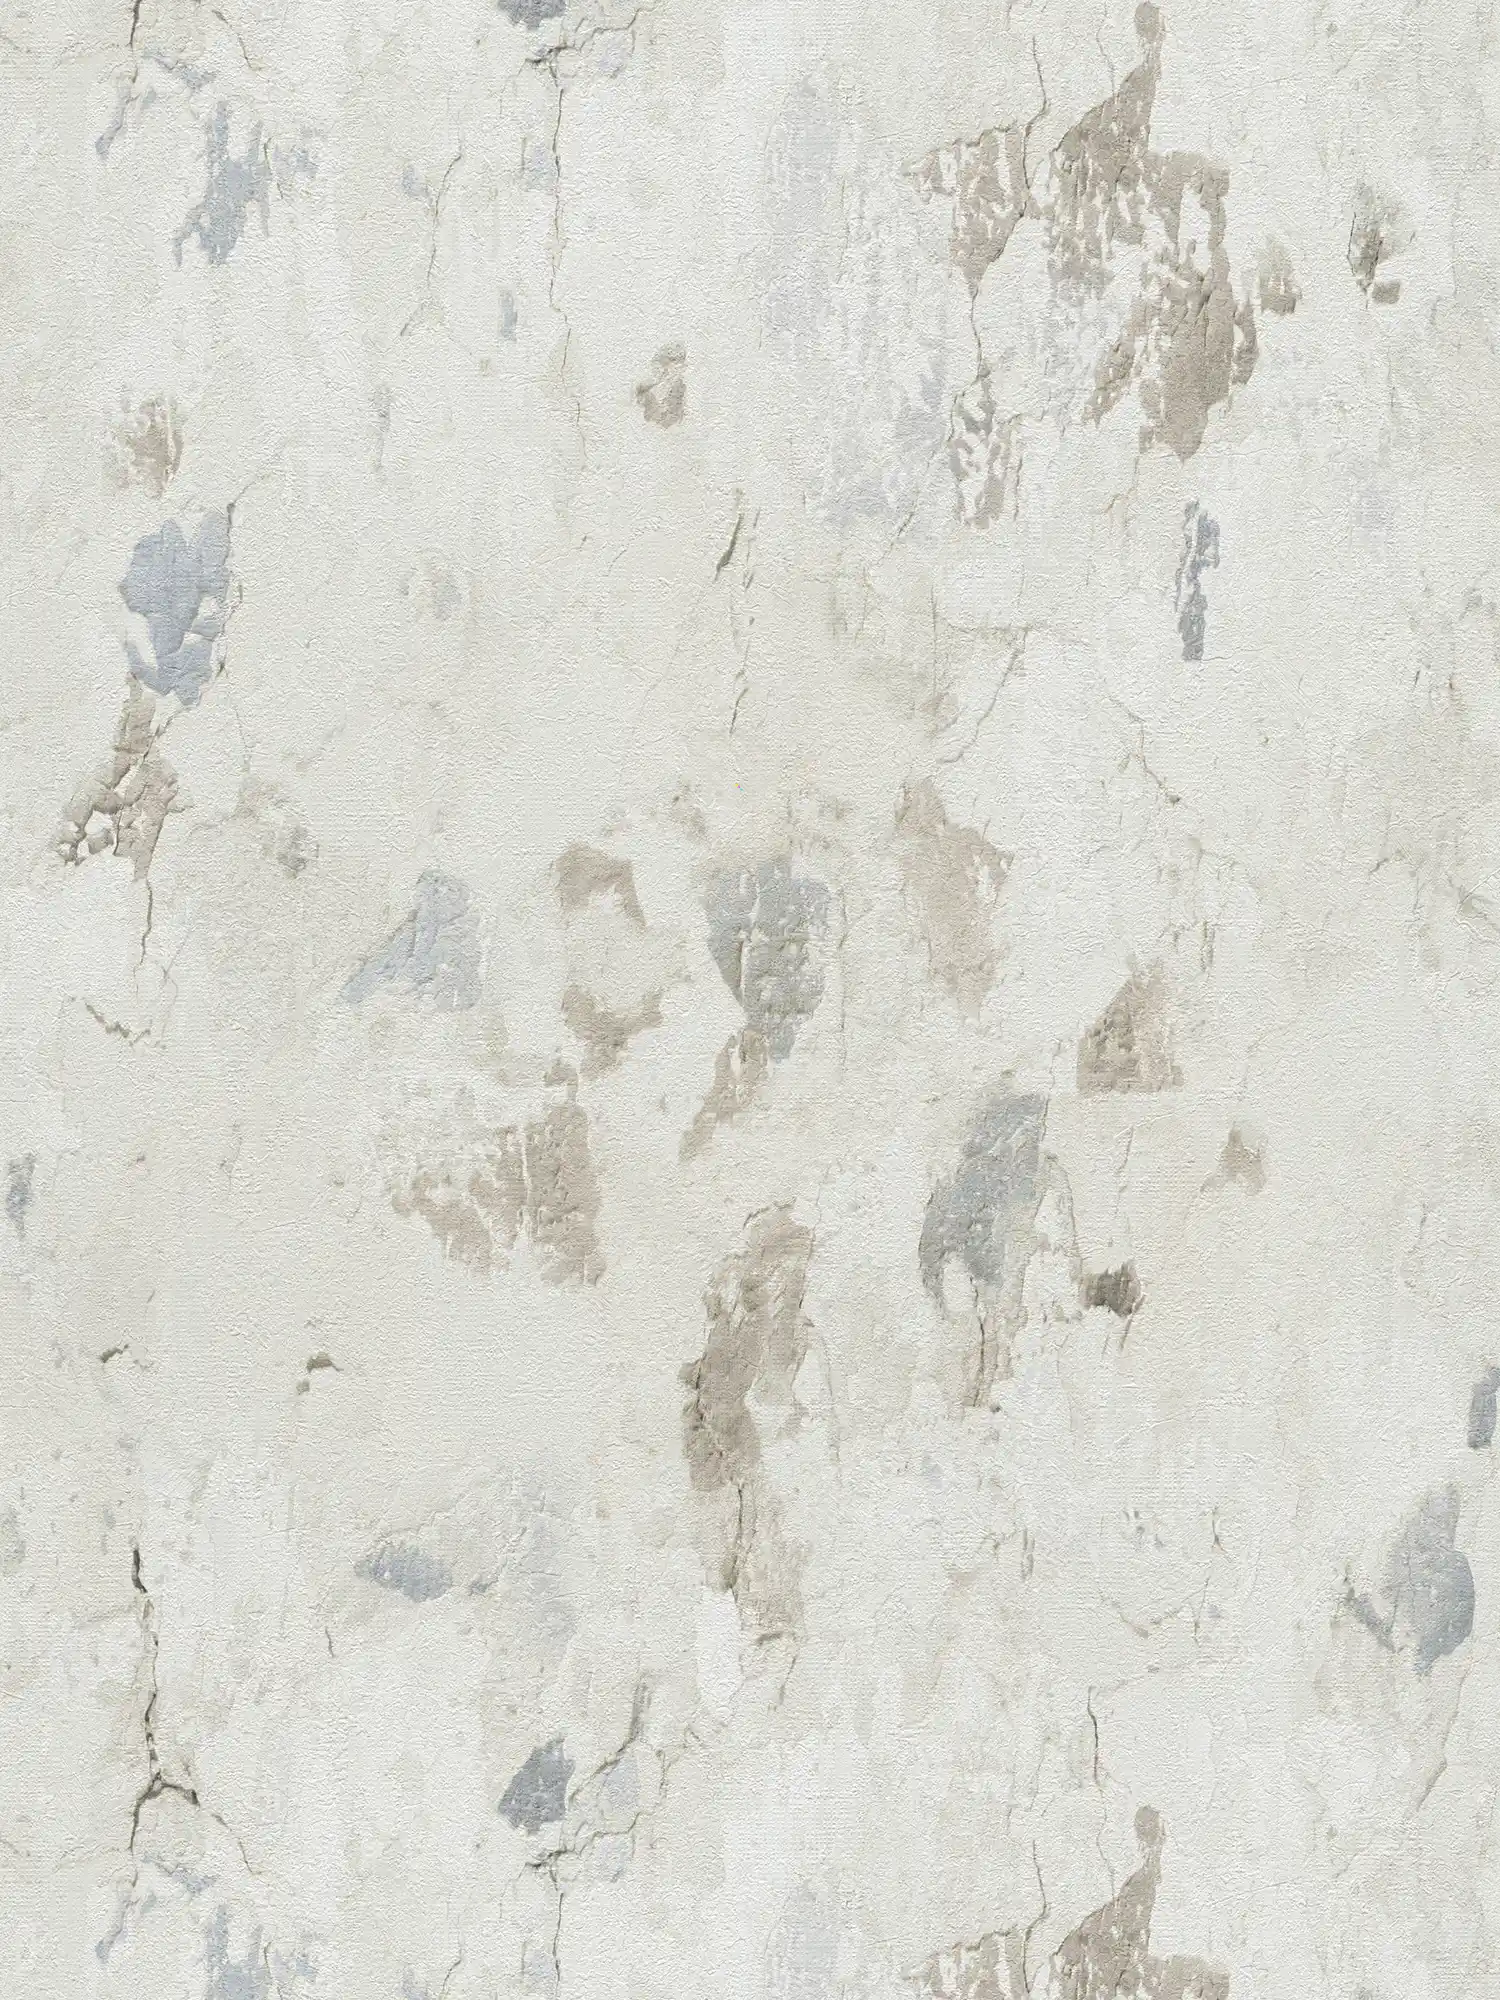         Wallpaper with plaster look in modern industrial style - cream, grey
    